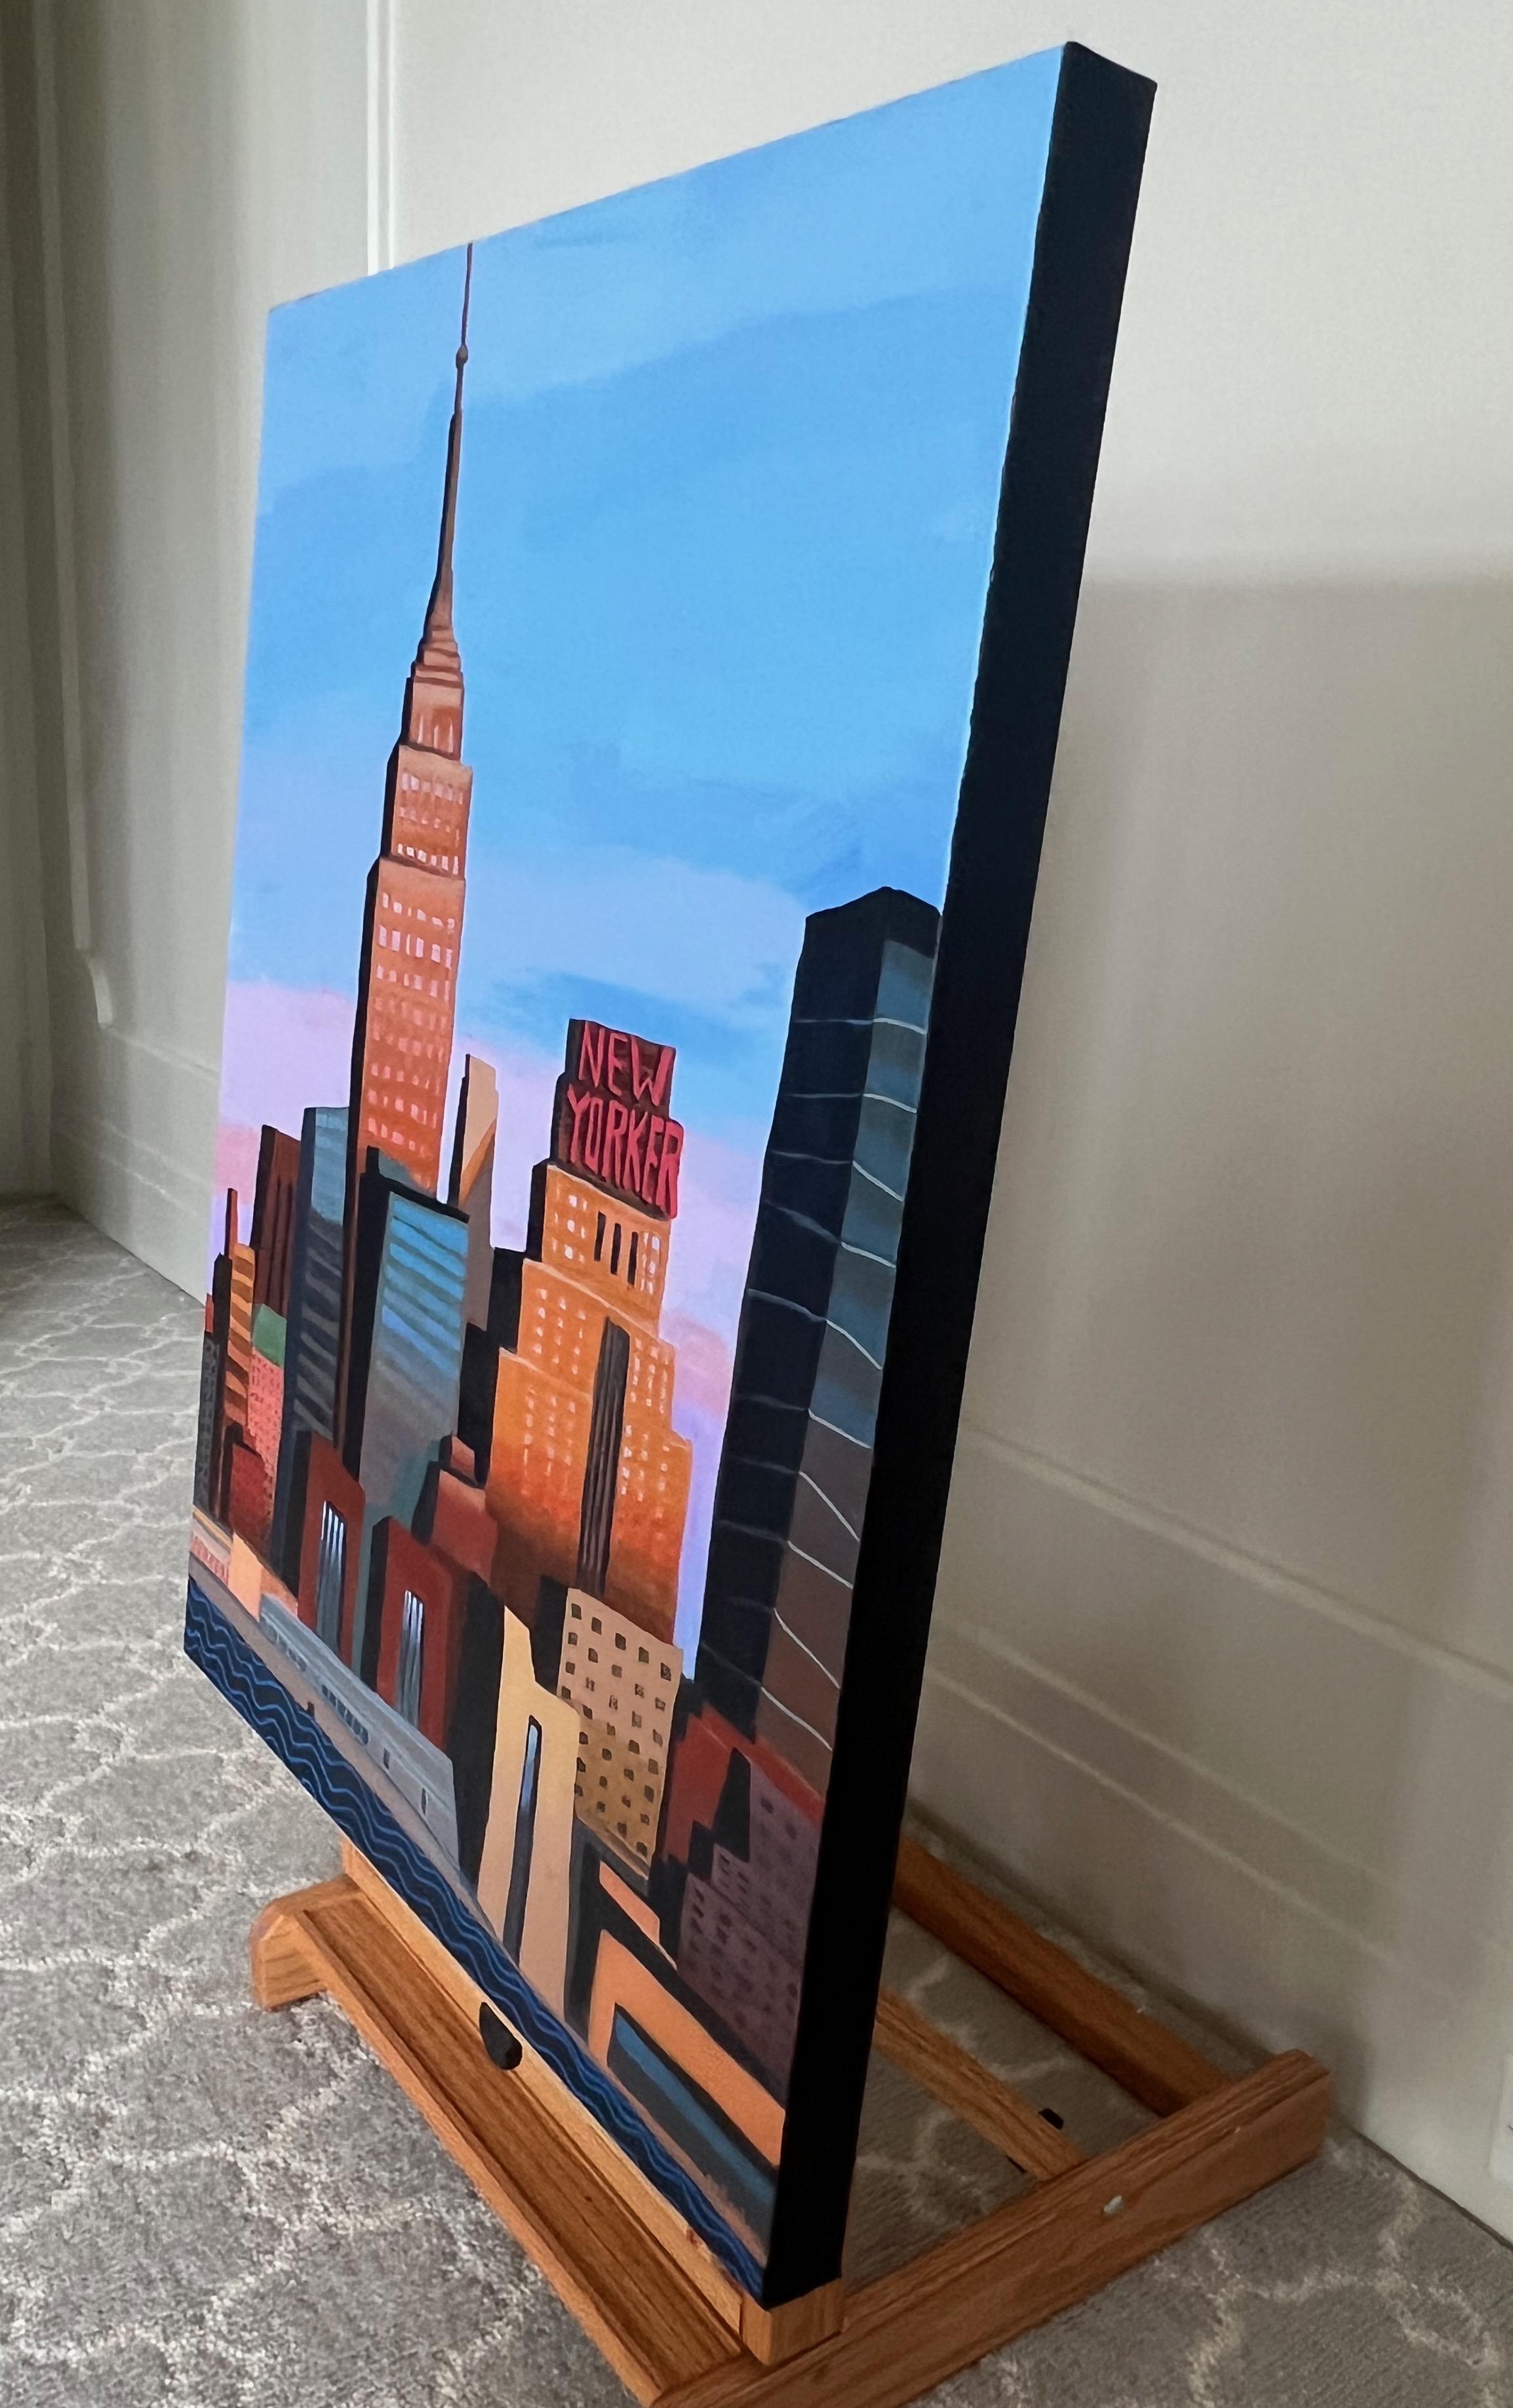 New Yorker and Empire State Building, peinture originale - Painting de Brian Callaghan